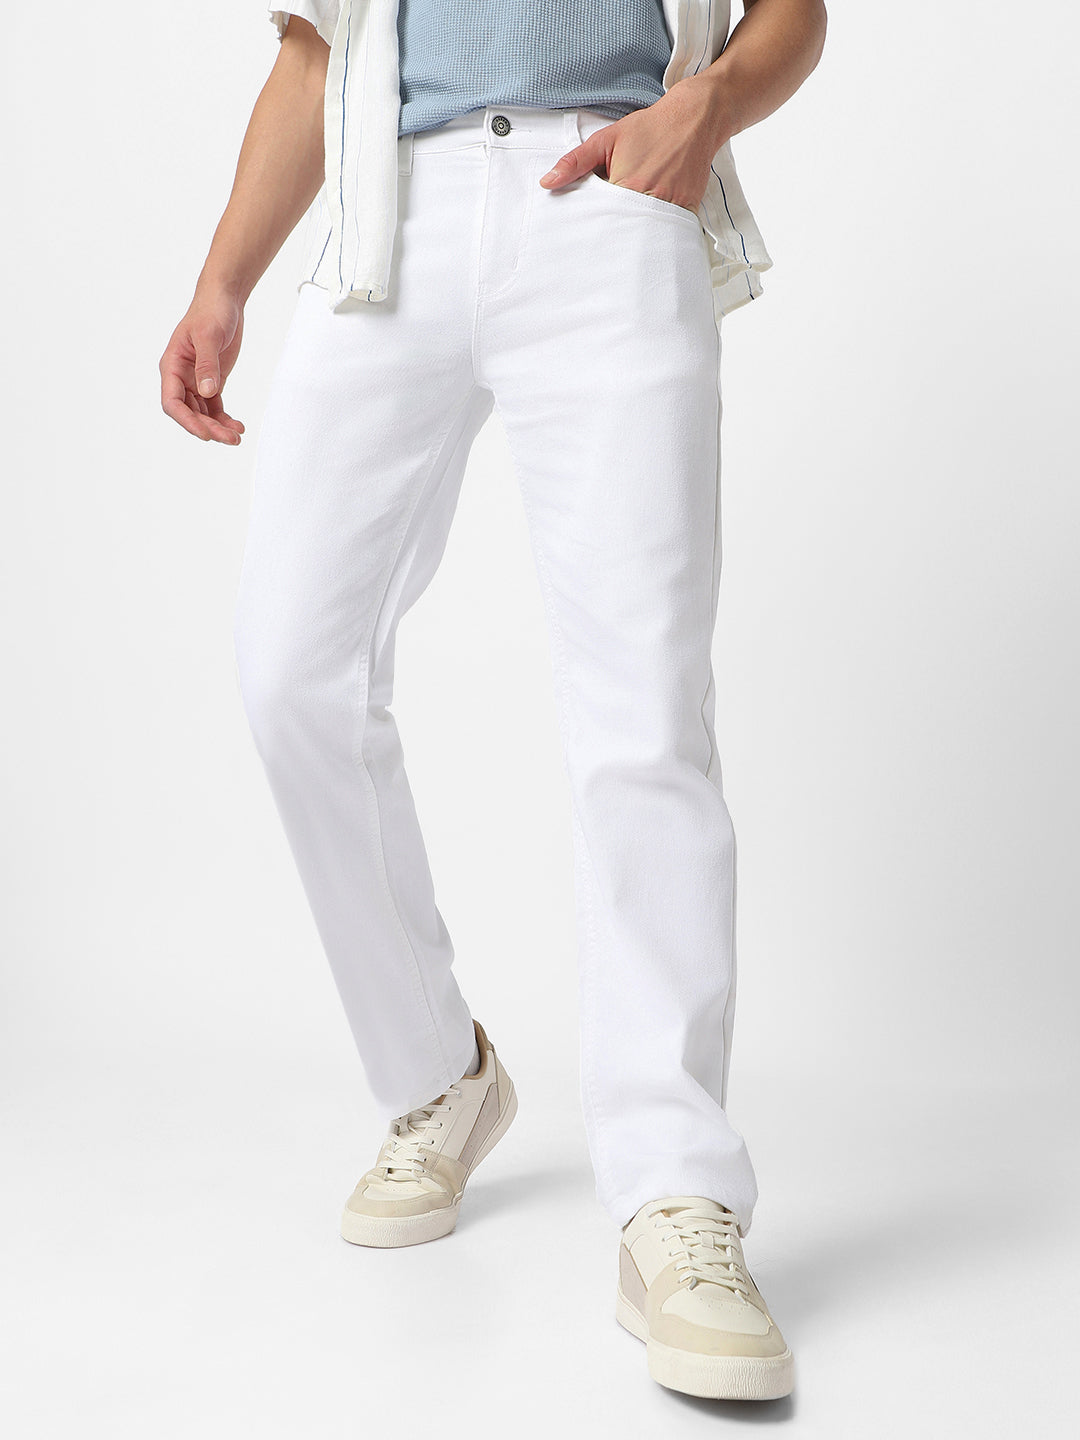 Men's White Regular Fit Washed Jeans Stretchable